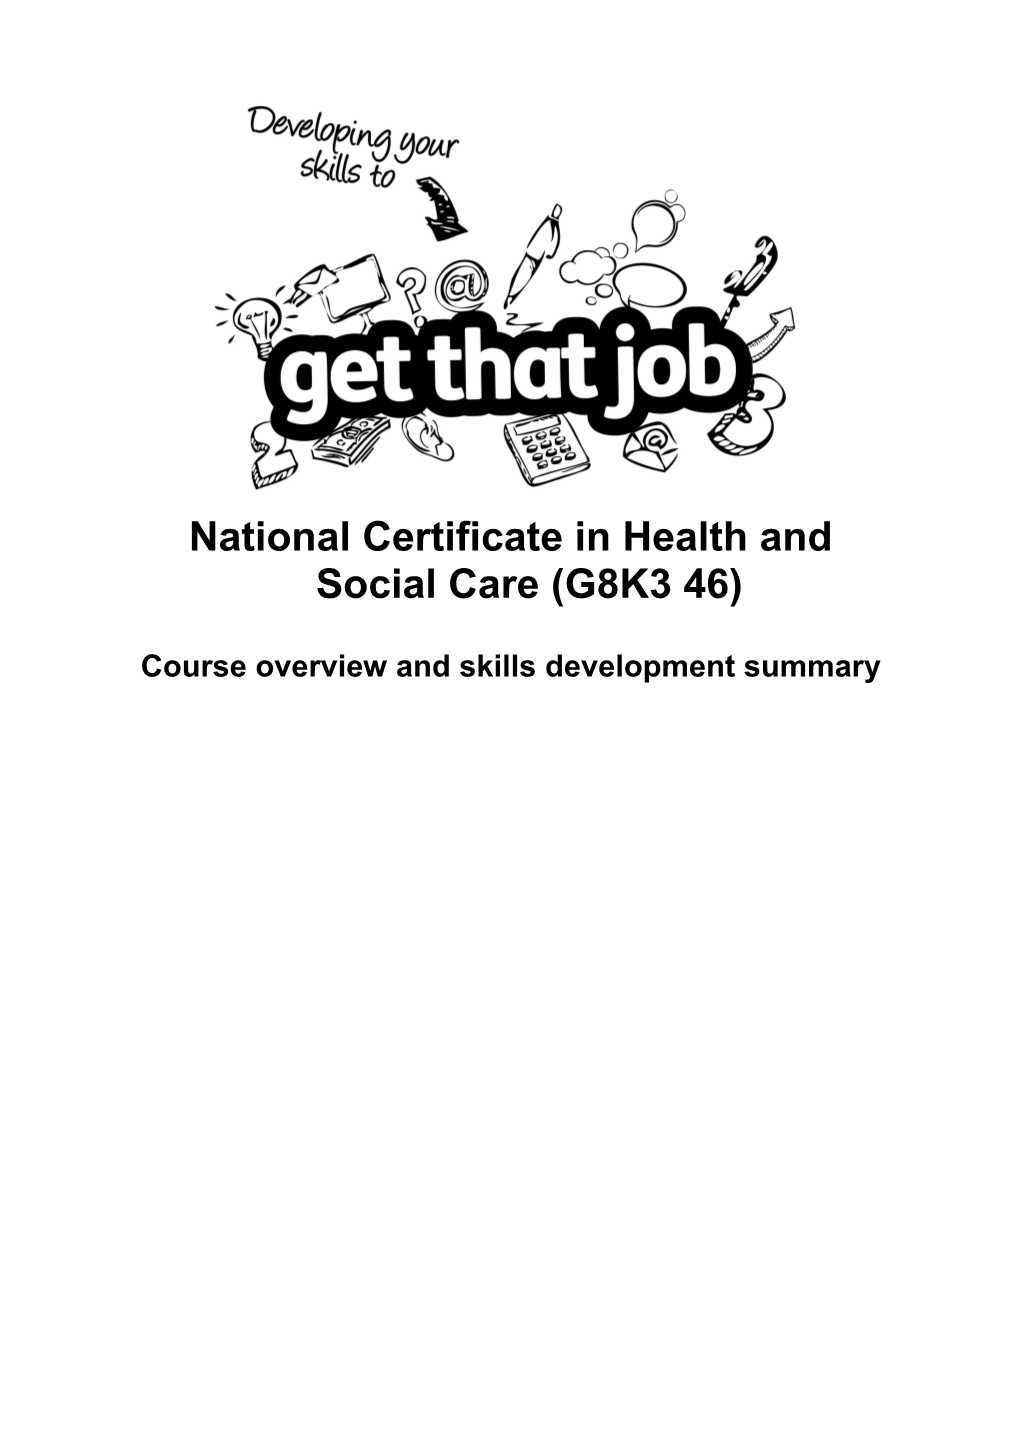 National Certificate in Health and Social Care (G8K3 46)